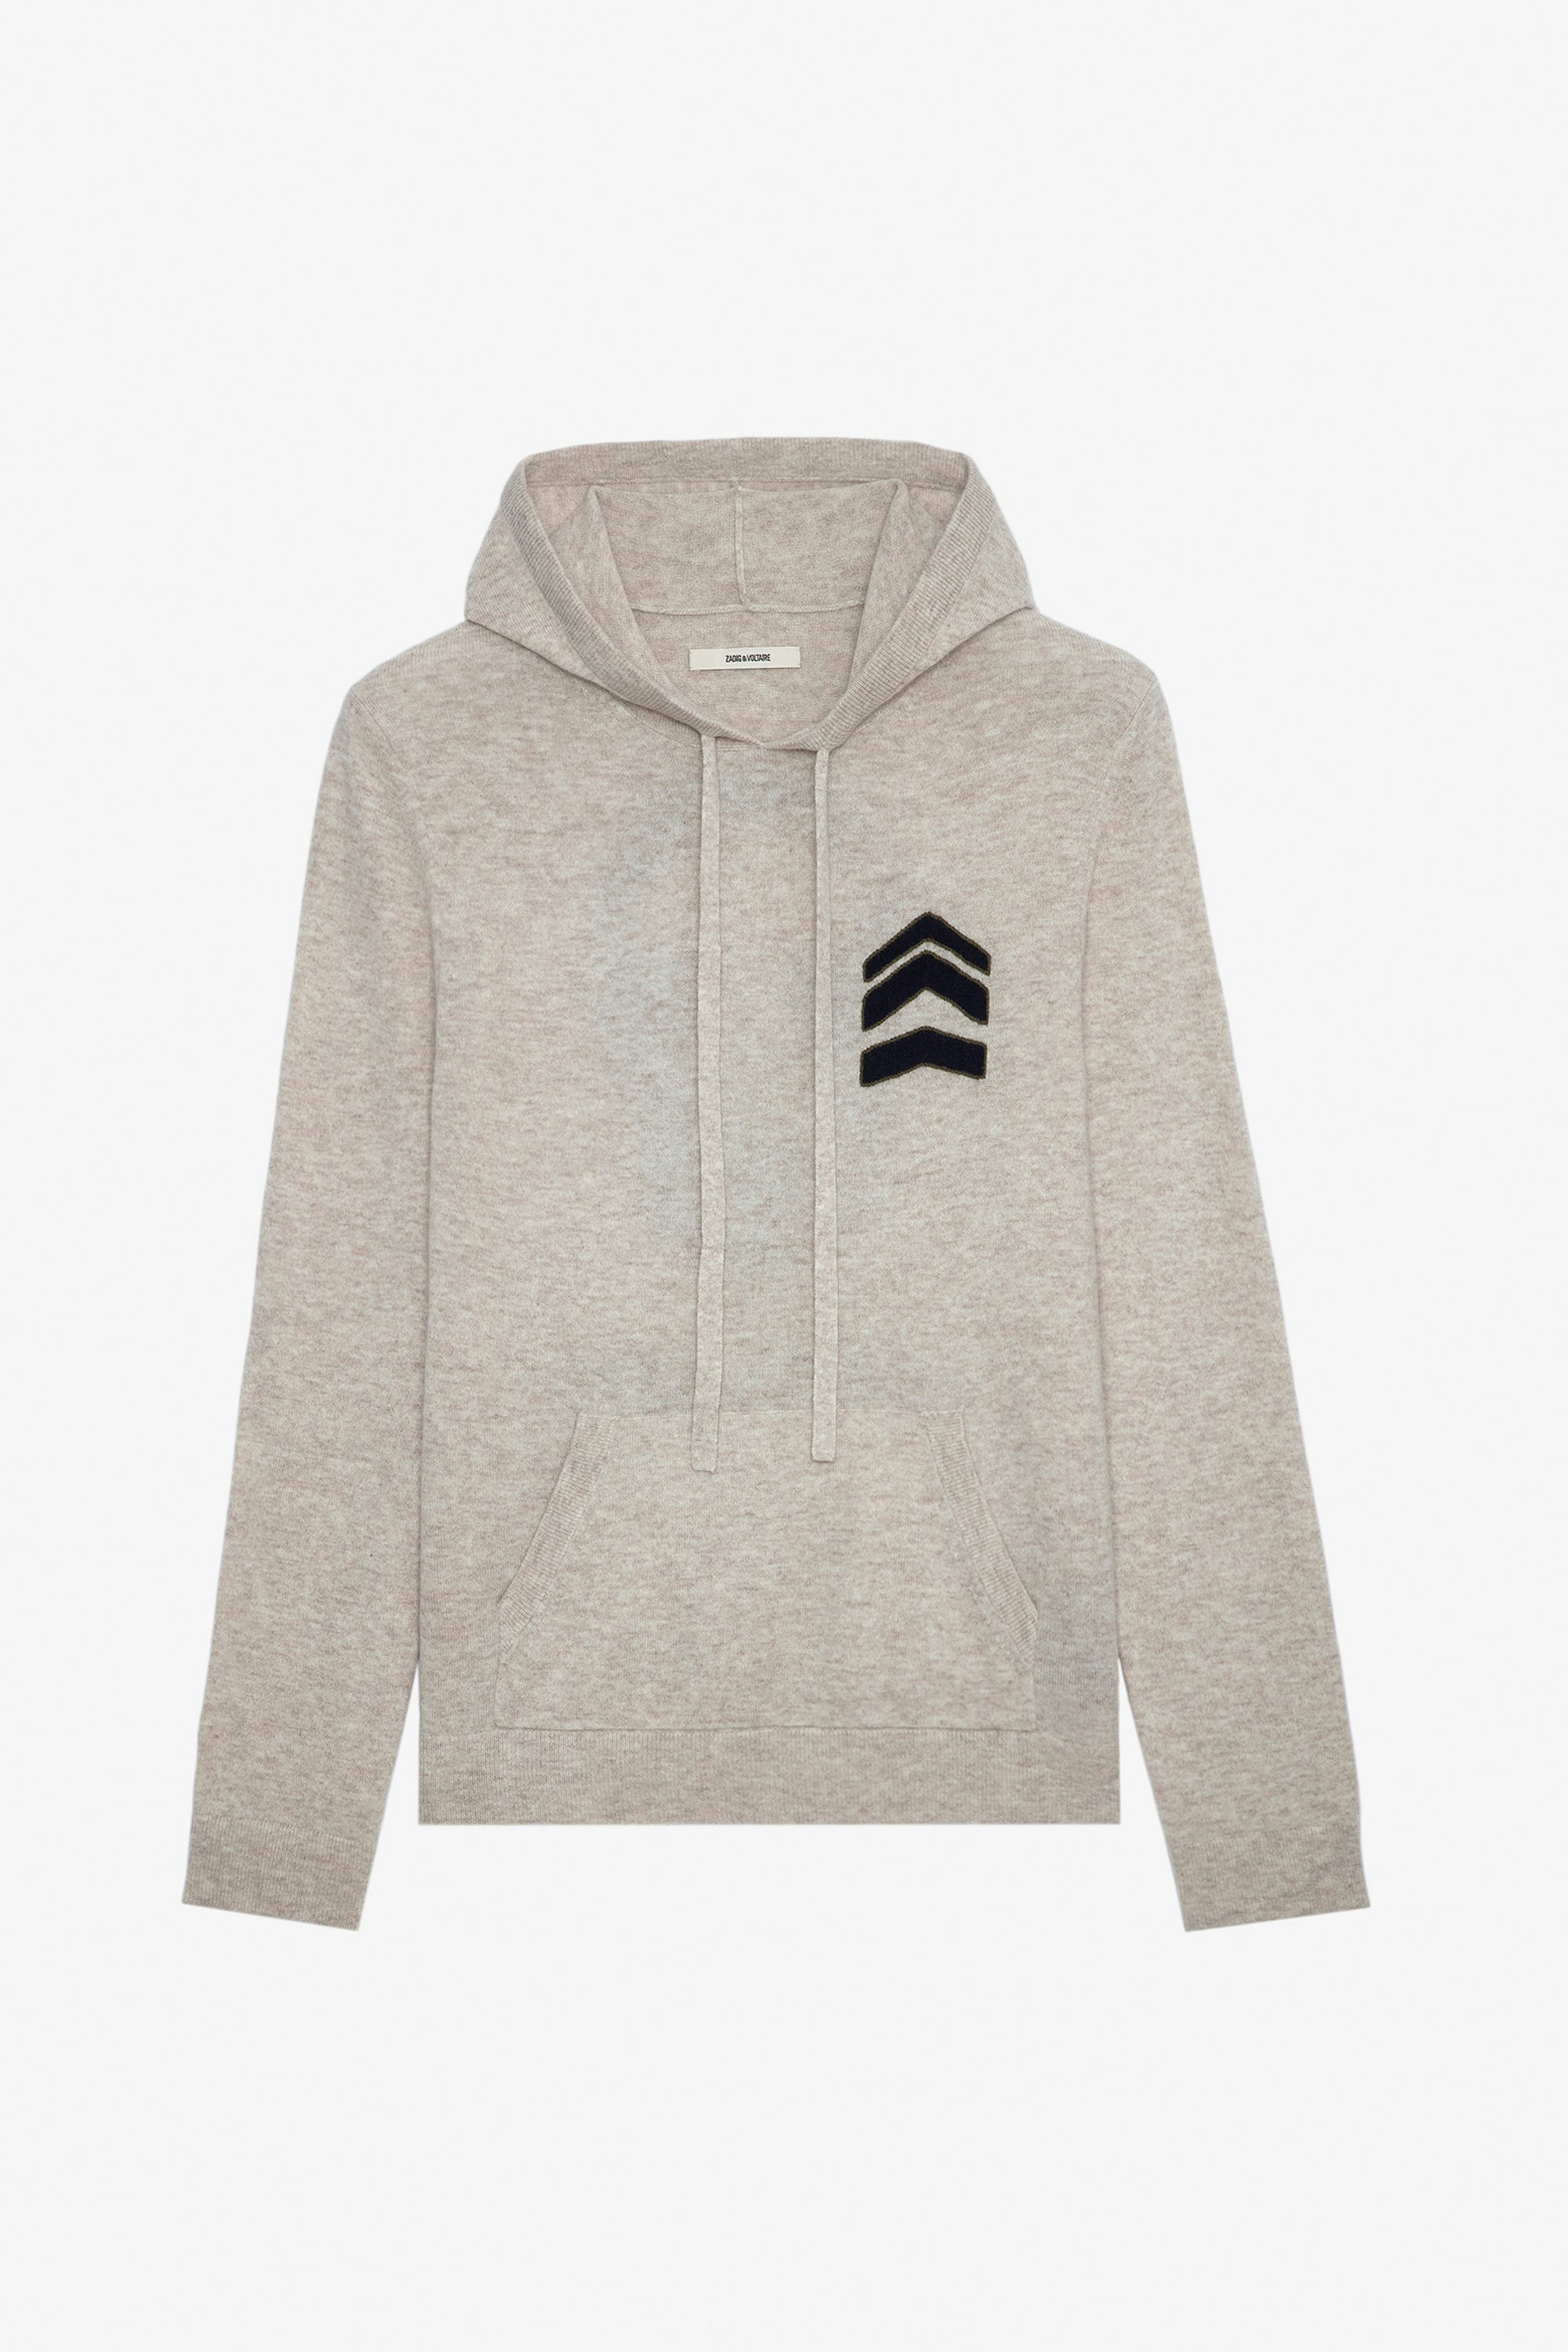 Clay Jumper - Men’s beige knit hoodie with arrows and skull motif on the back.